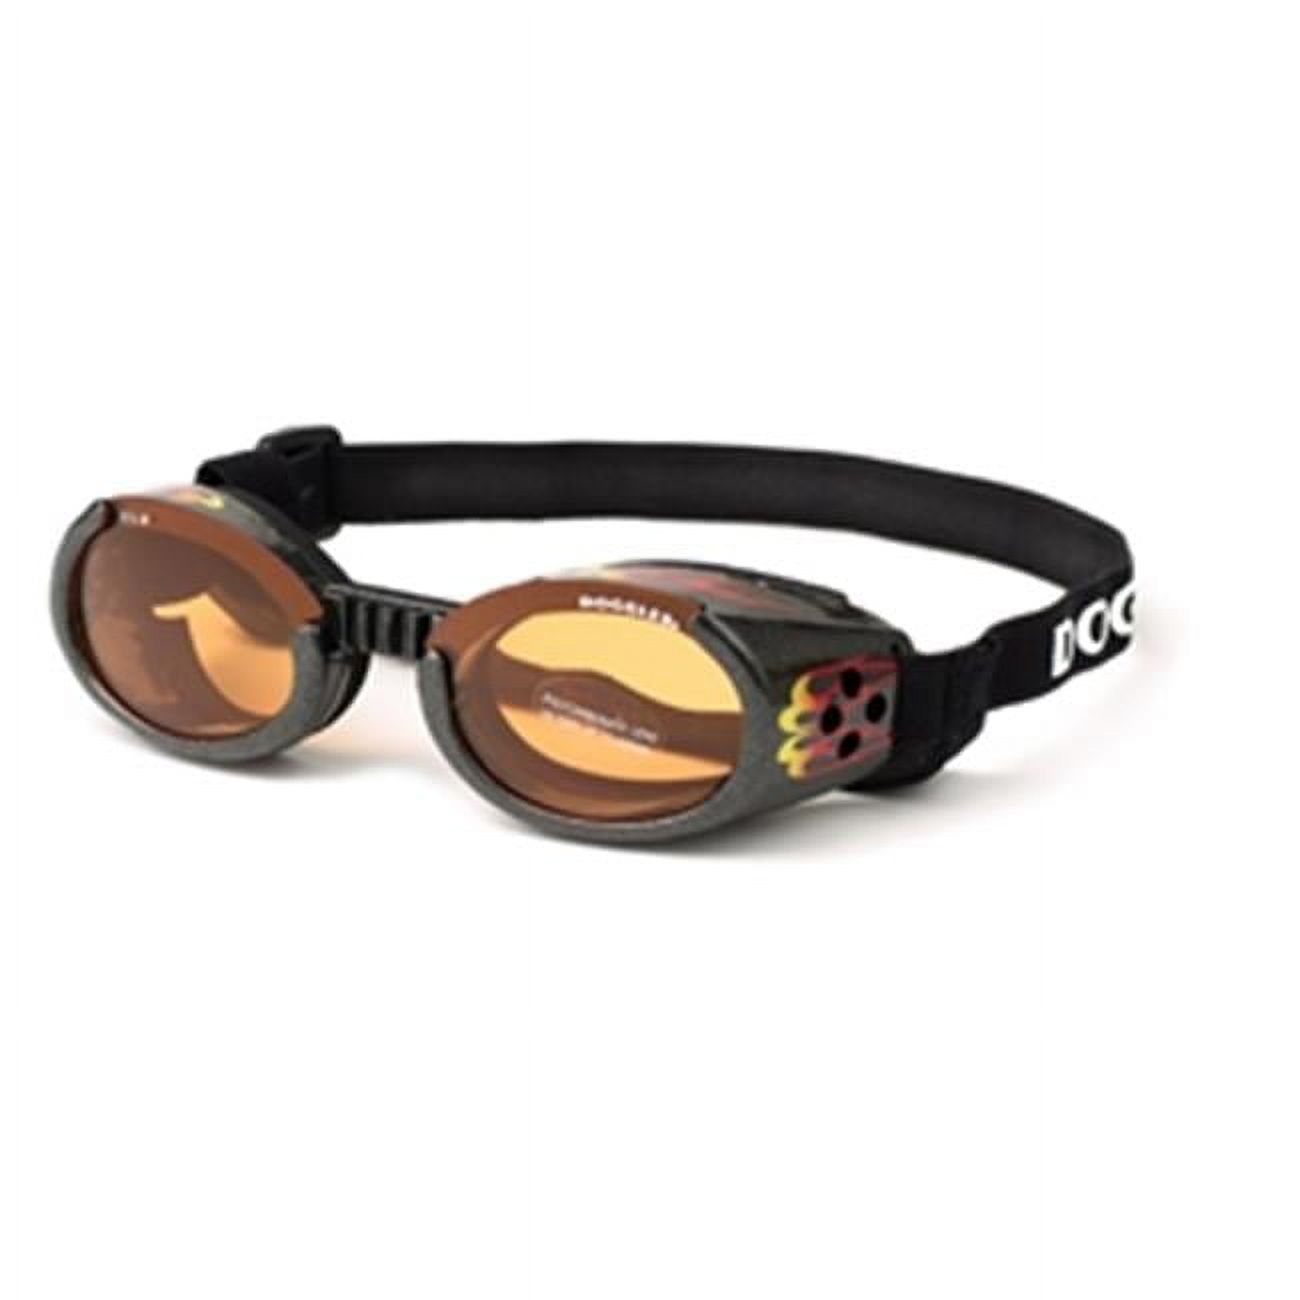 Doggles ILS Racing Flames Sunglasses for Dogs - image 1 of 7